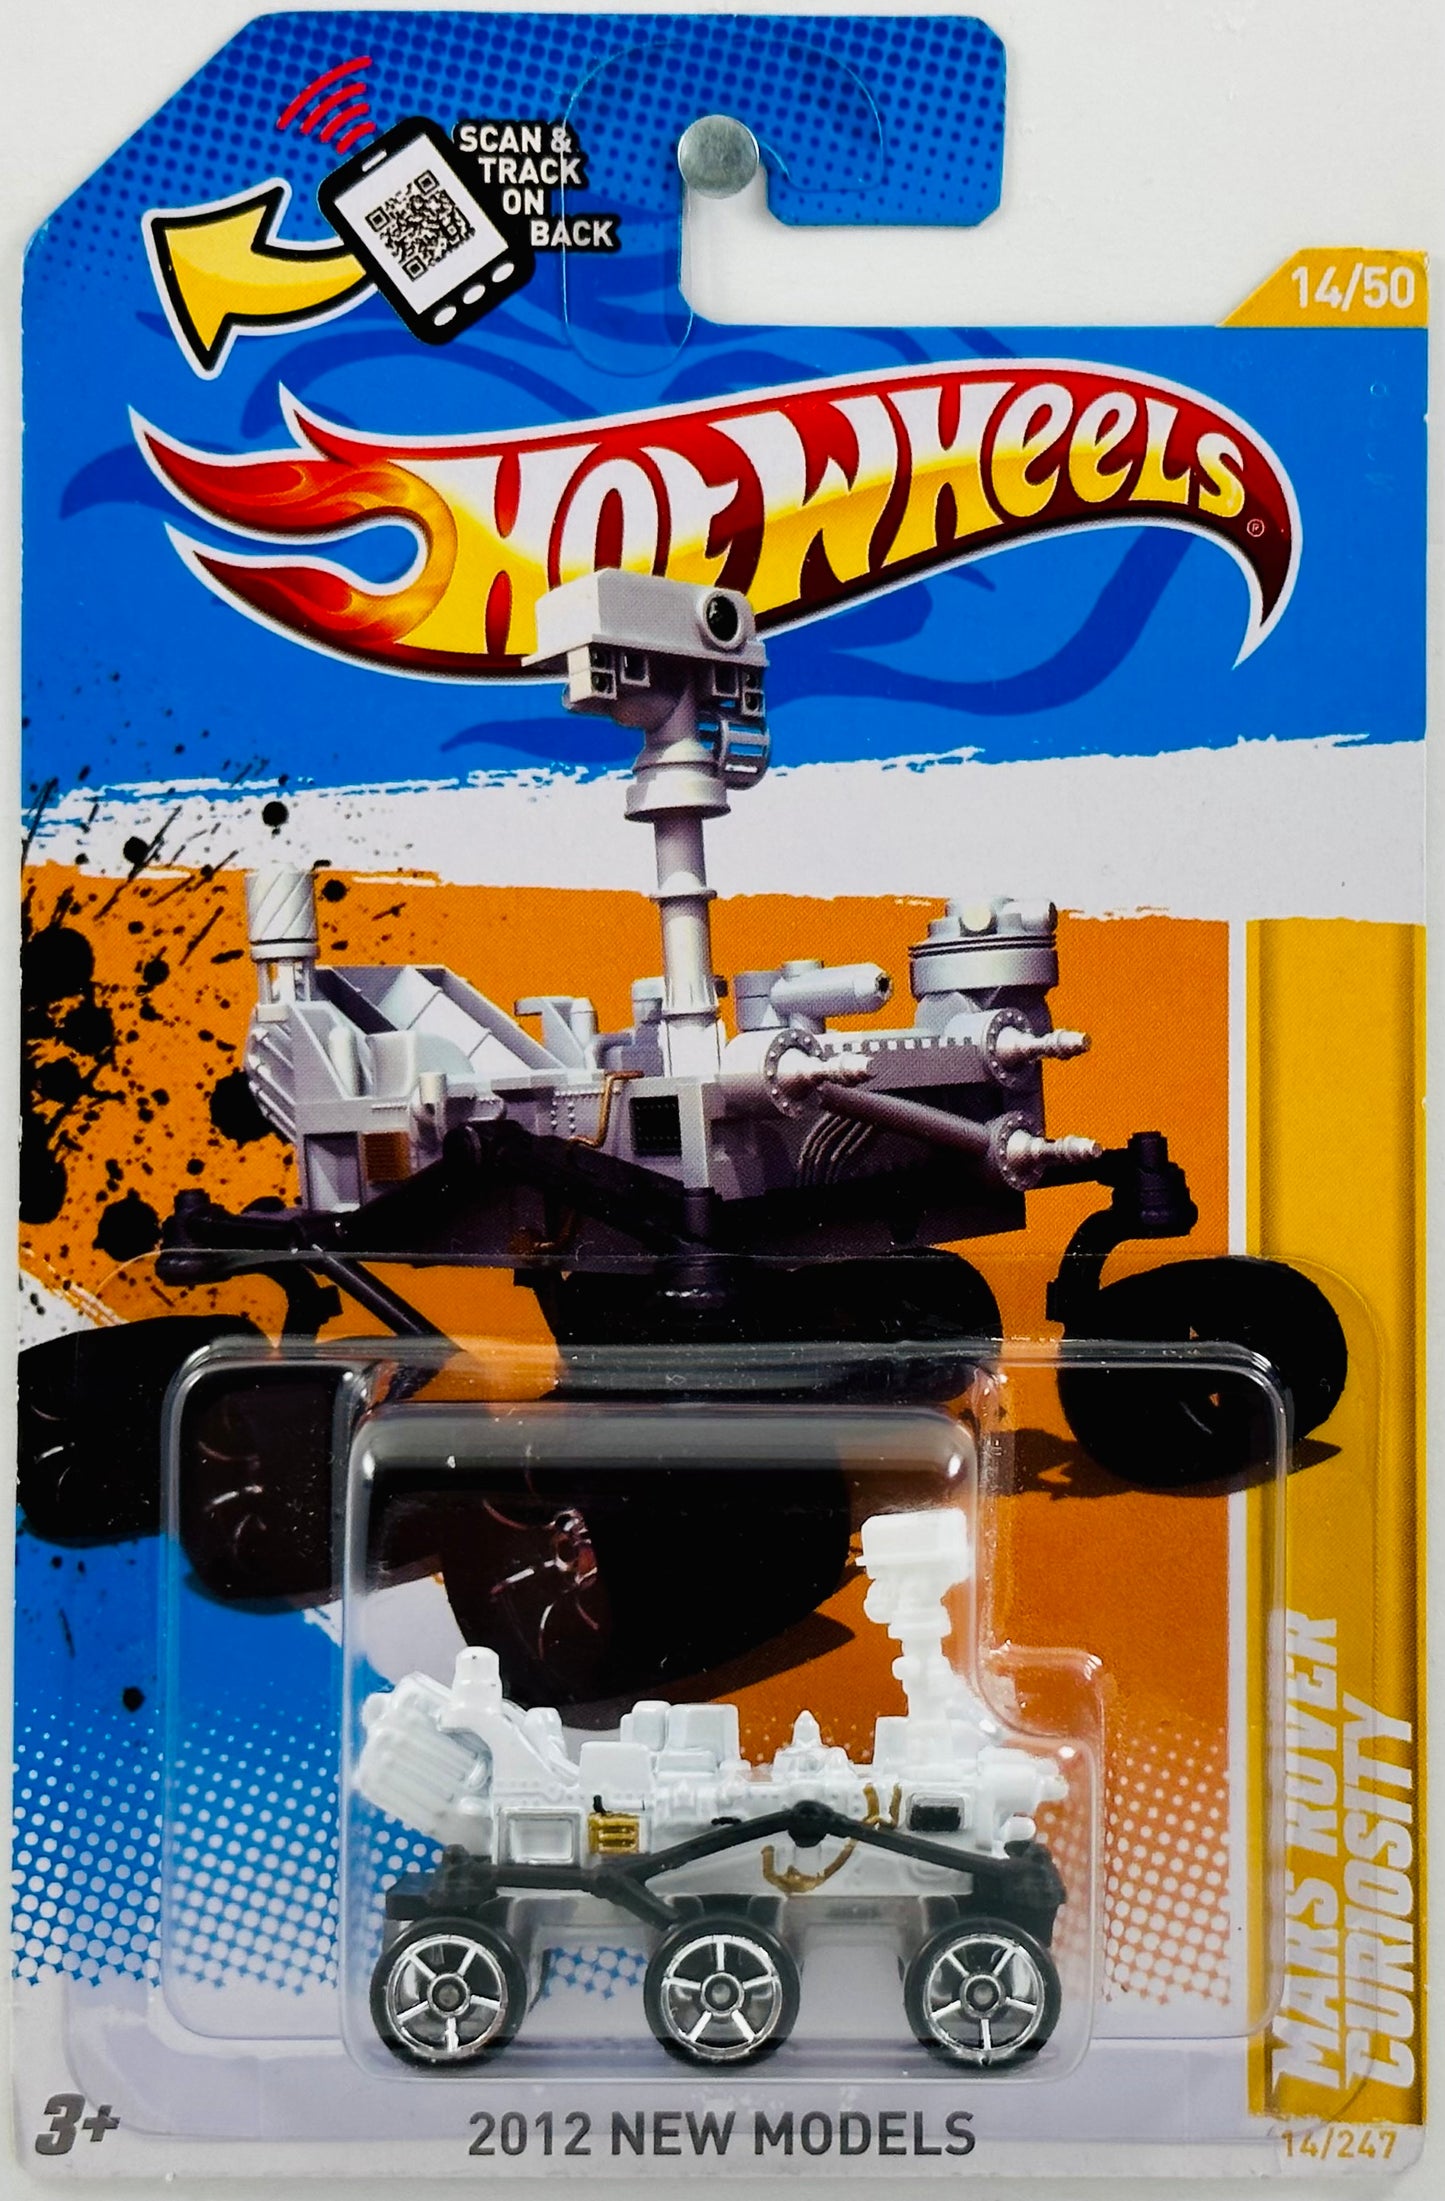 Hot Wheels 2012 - Collector # 014/247 - New Models 14/50 - Mars Rover Curiosity - White